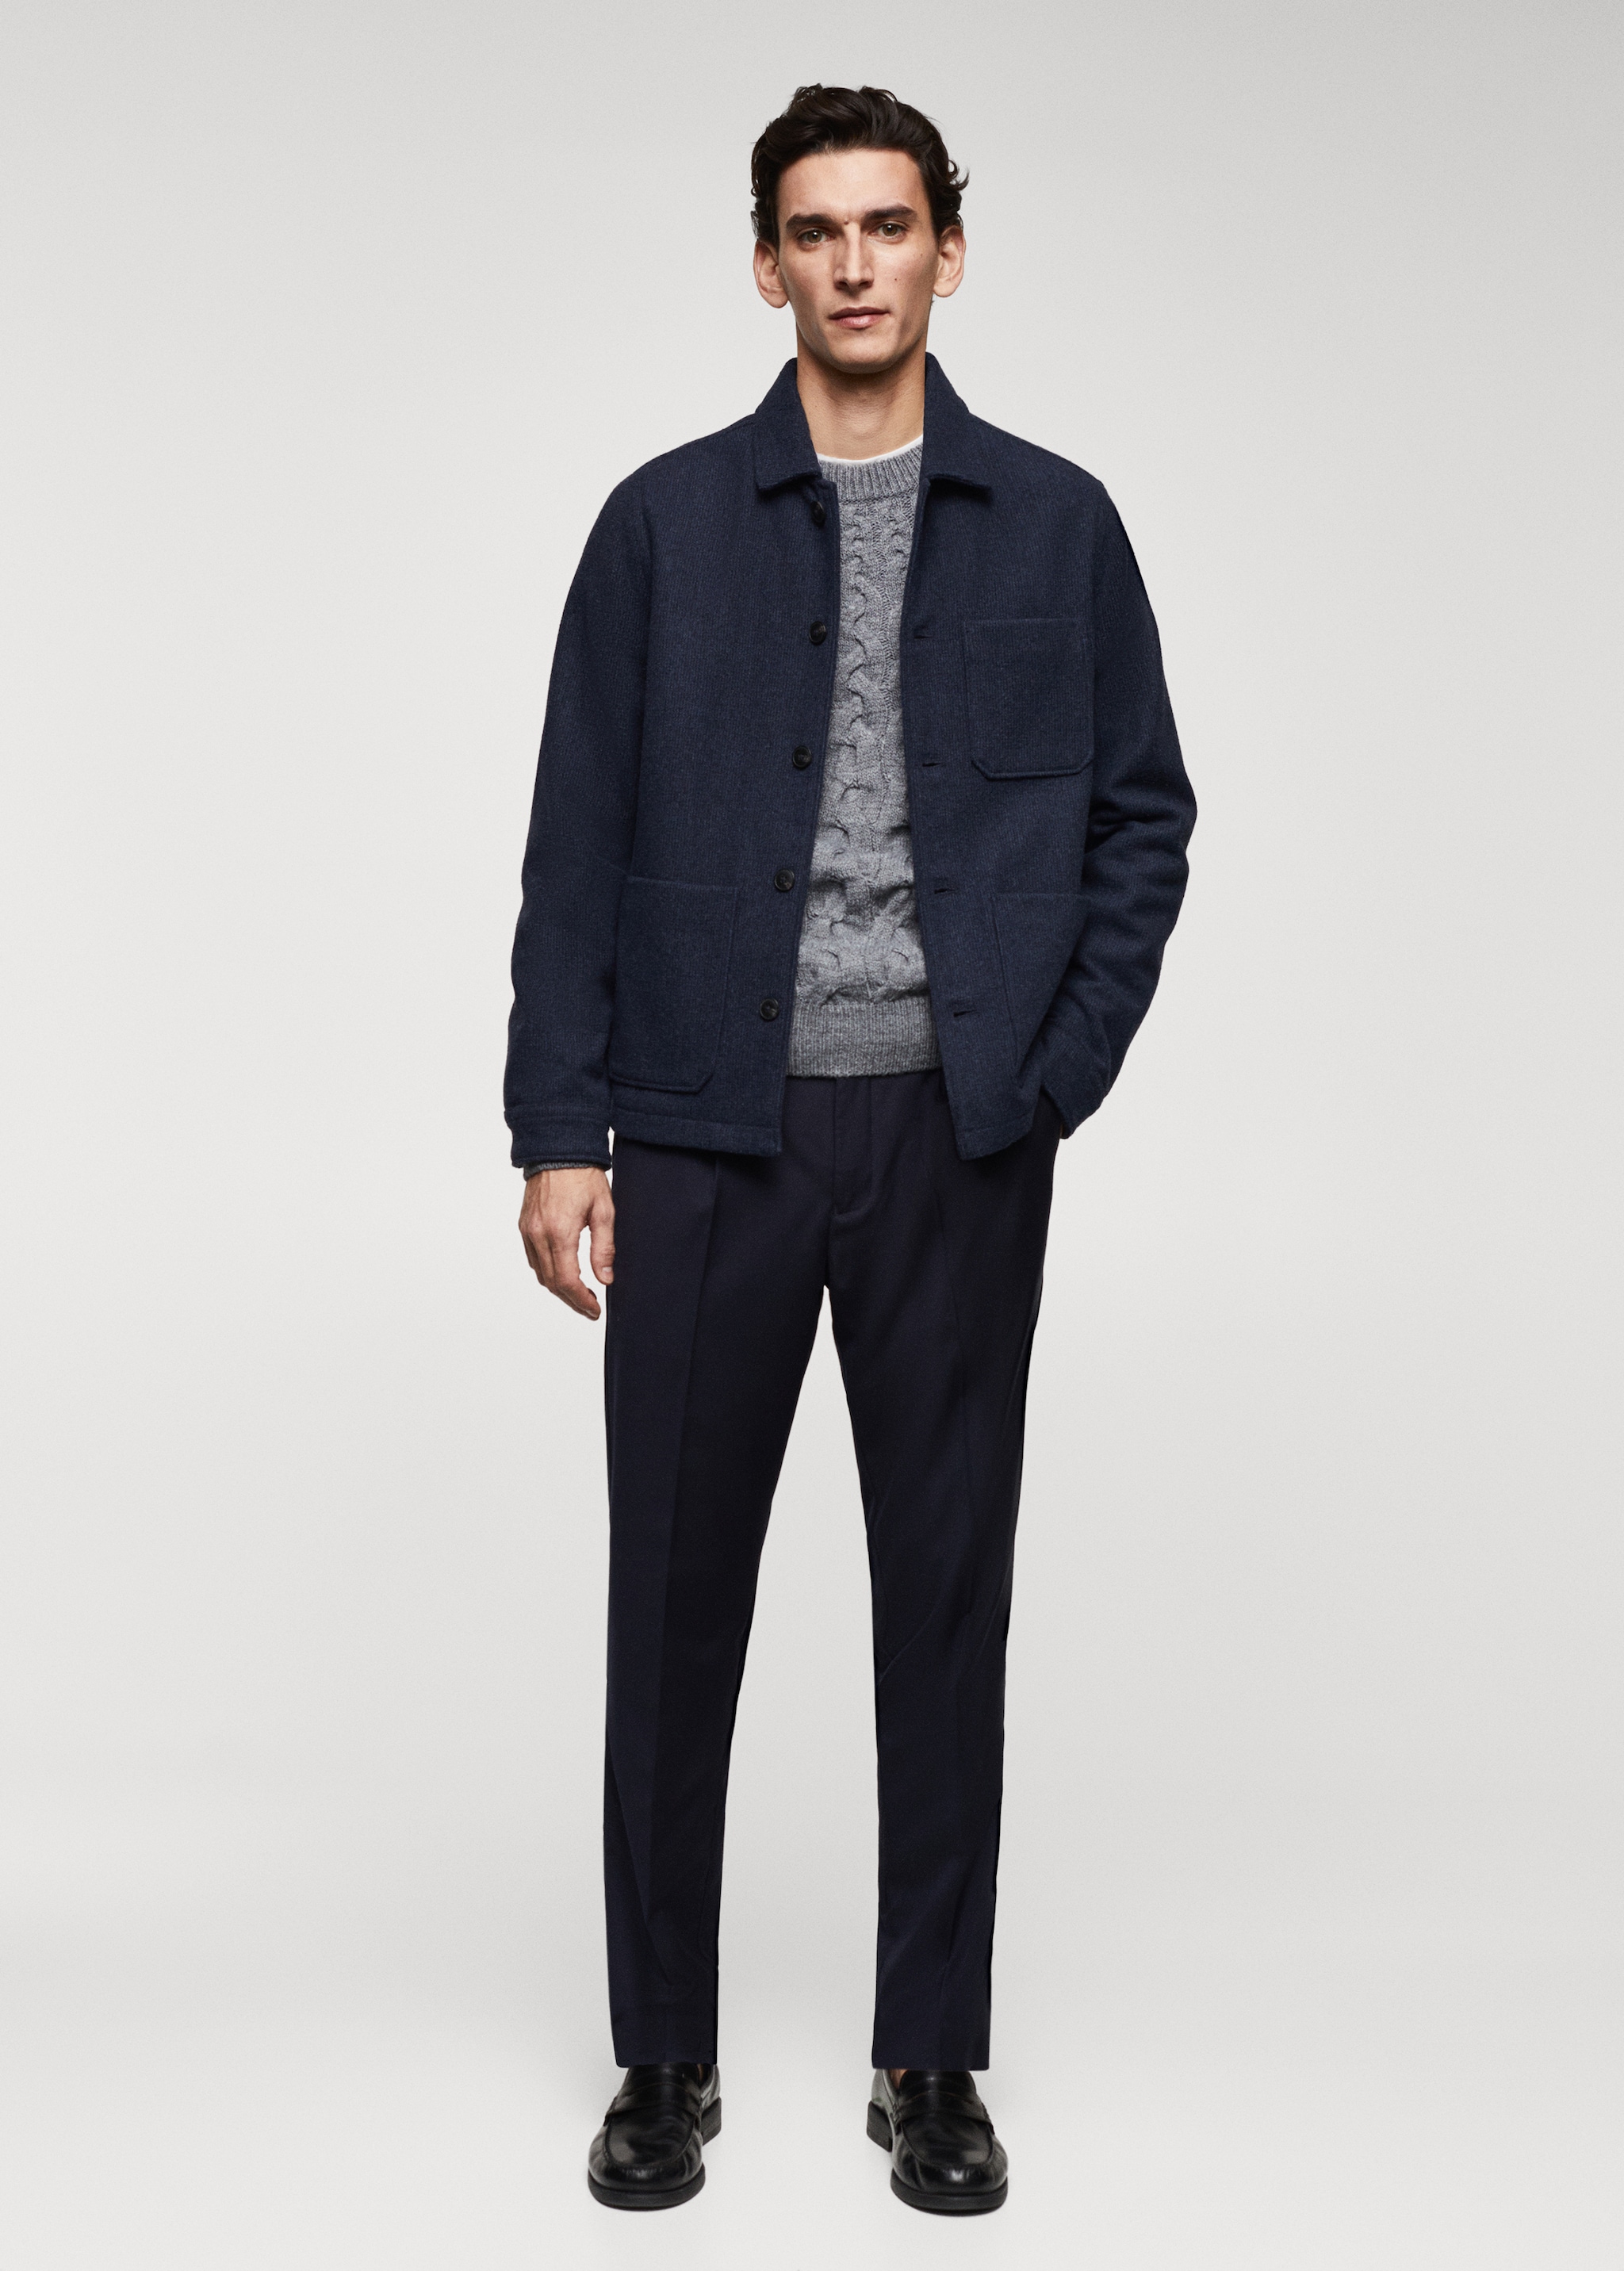 Double-faced wool overshirt with pockets - General plane